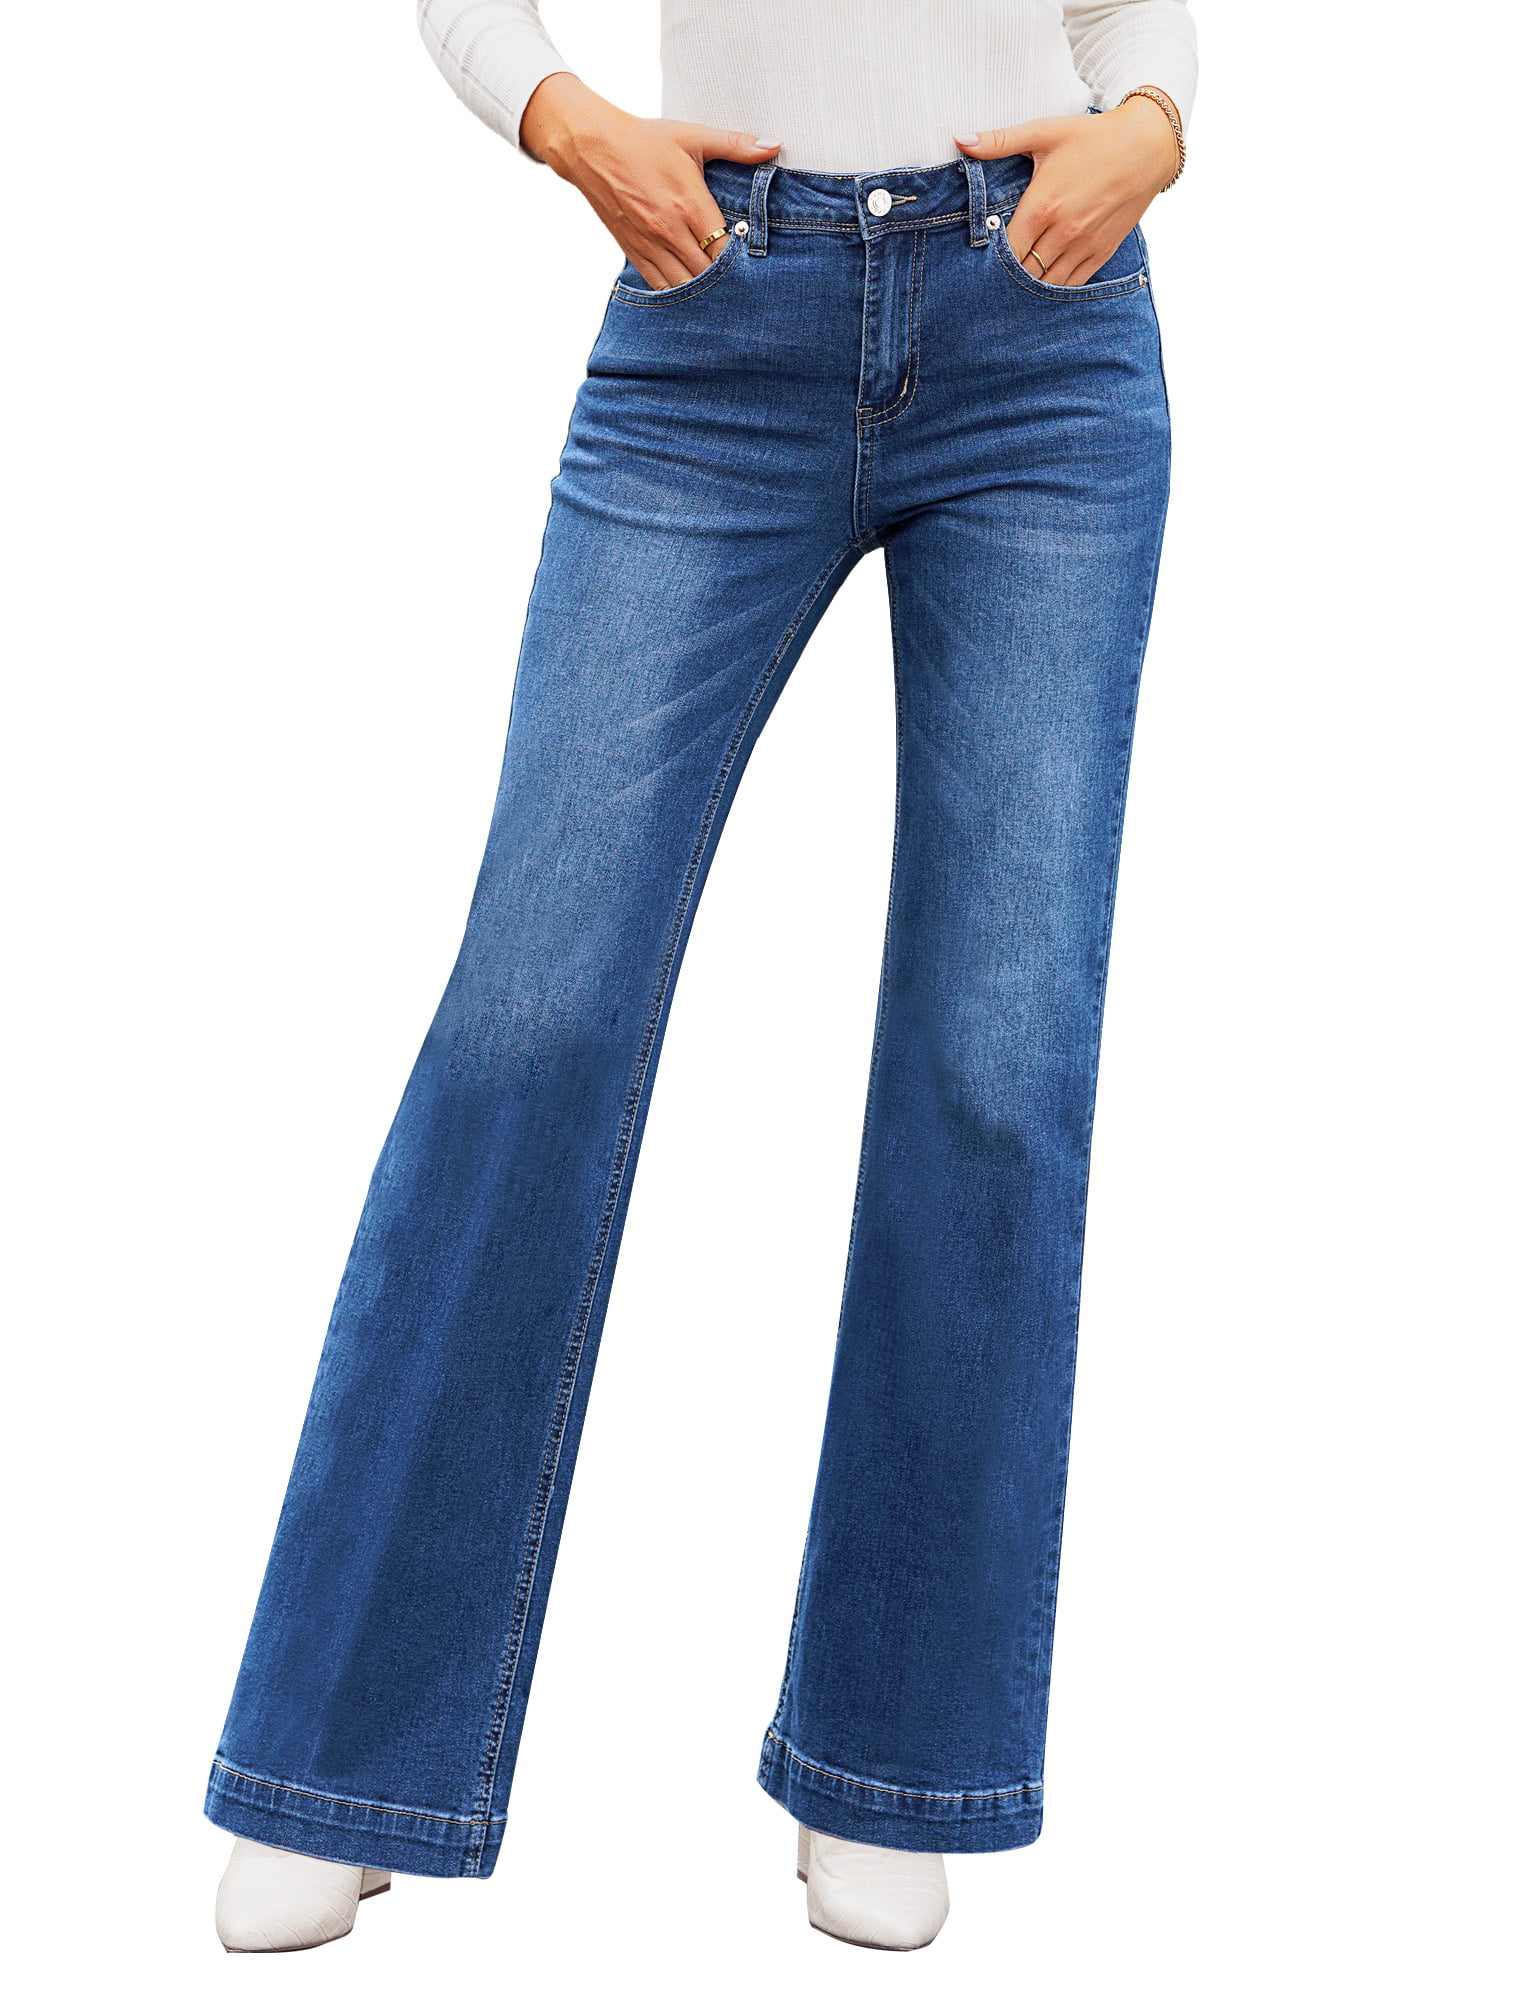 Vetinee Wide Leg Jeans for Women Summer Fall Casual Fitted High